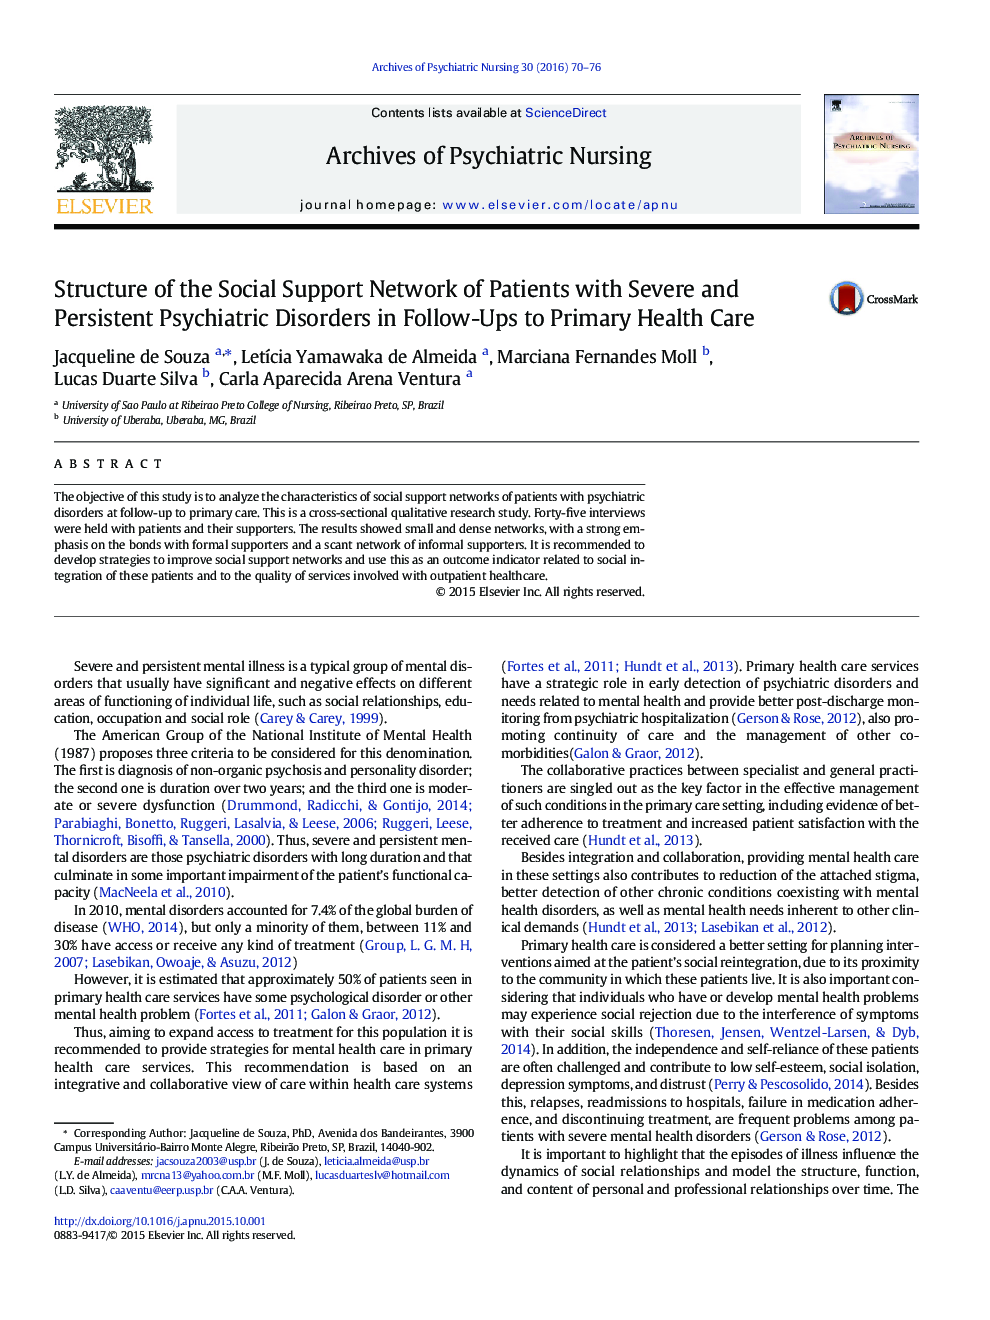 Structure of the Social Support Network of Patients with Severe and Persistent Psychiatric Disorders in Follow-Ups to Primary Health Care